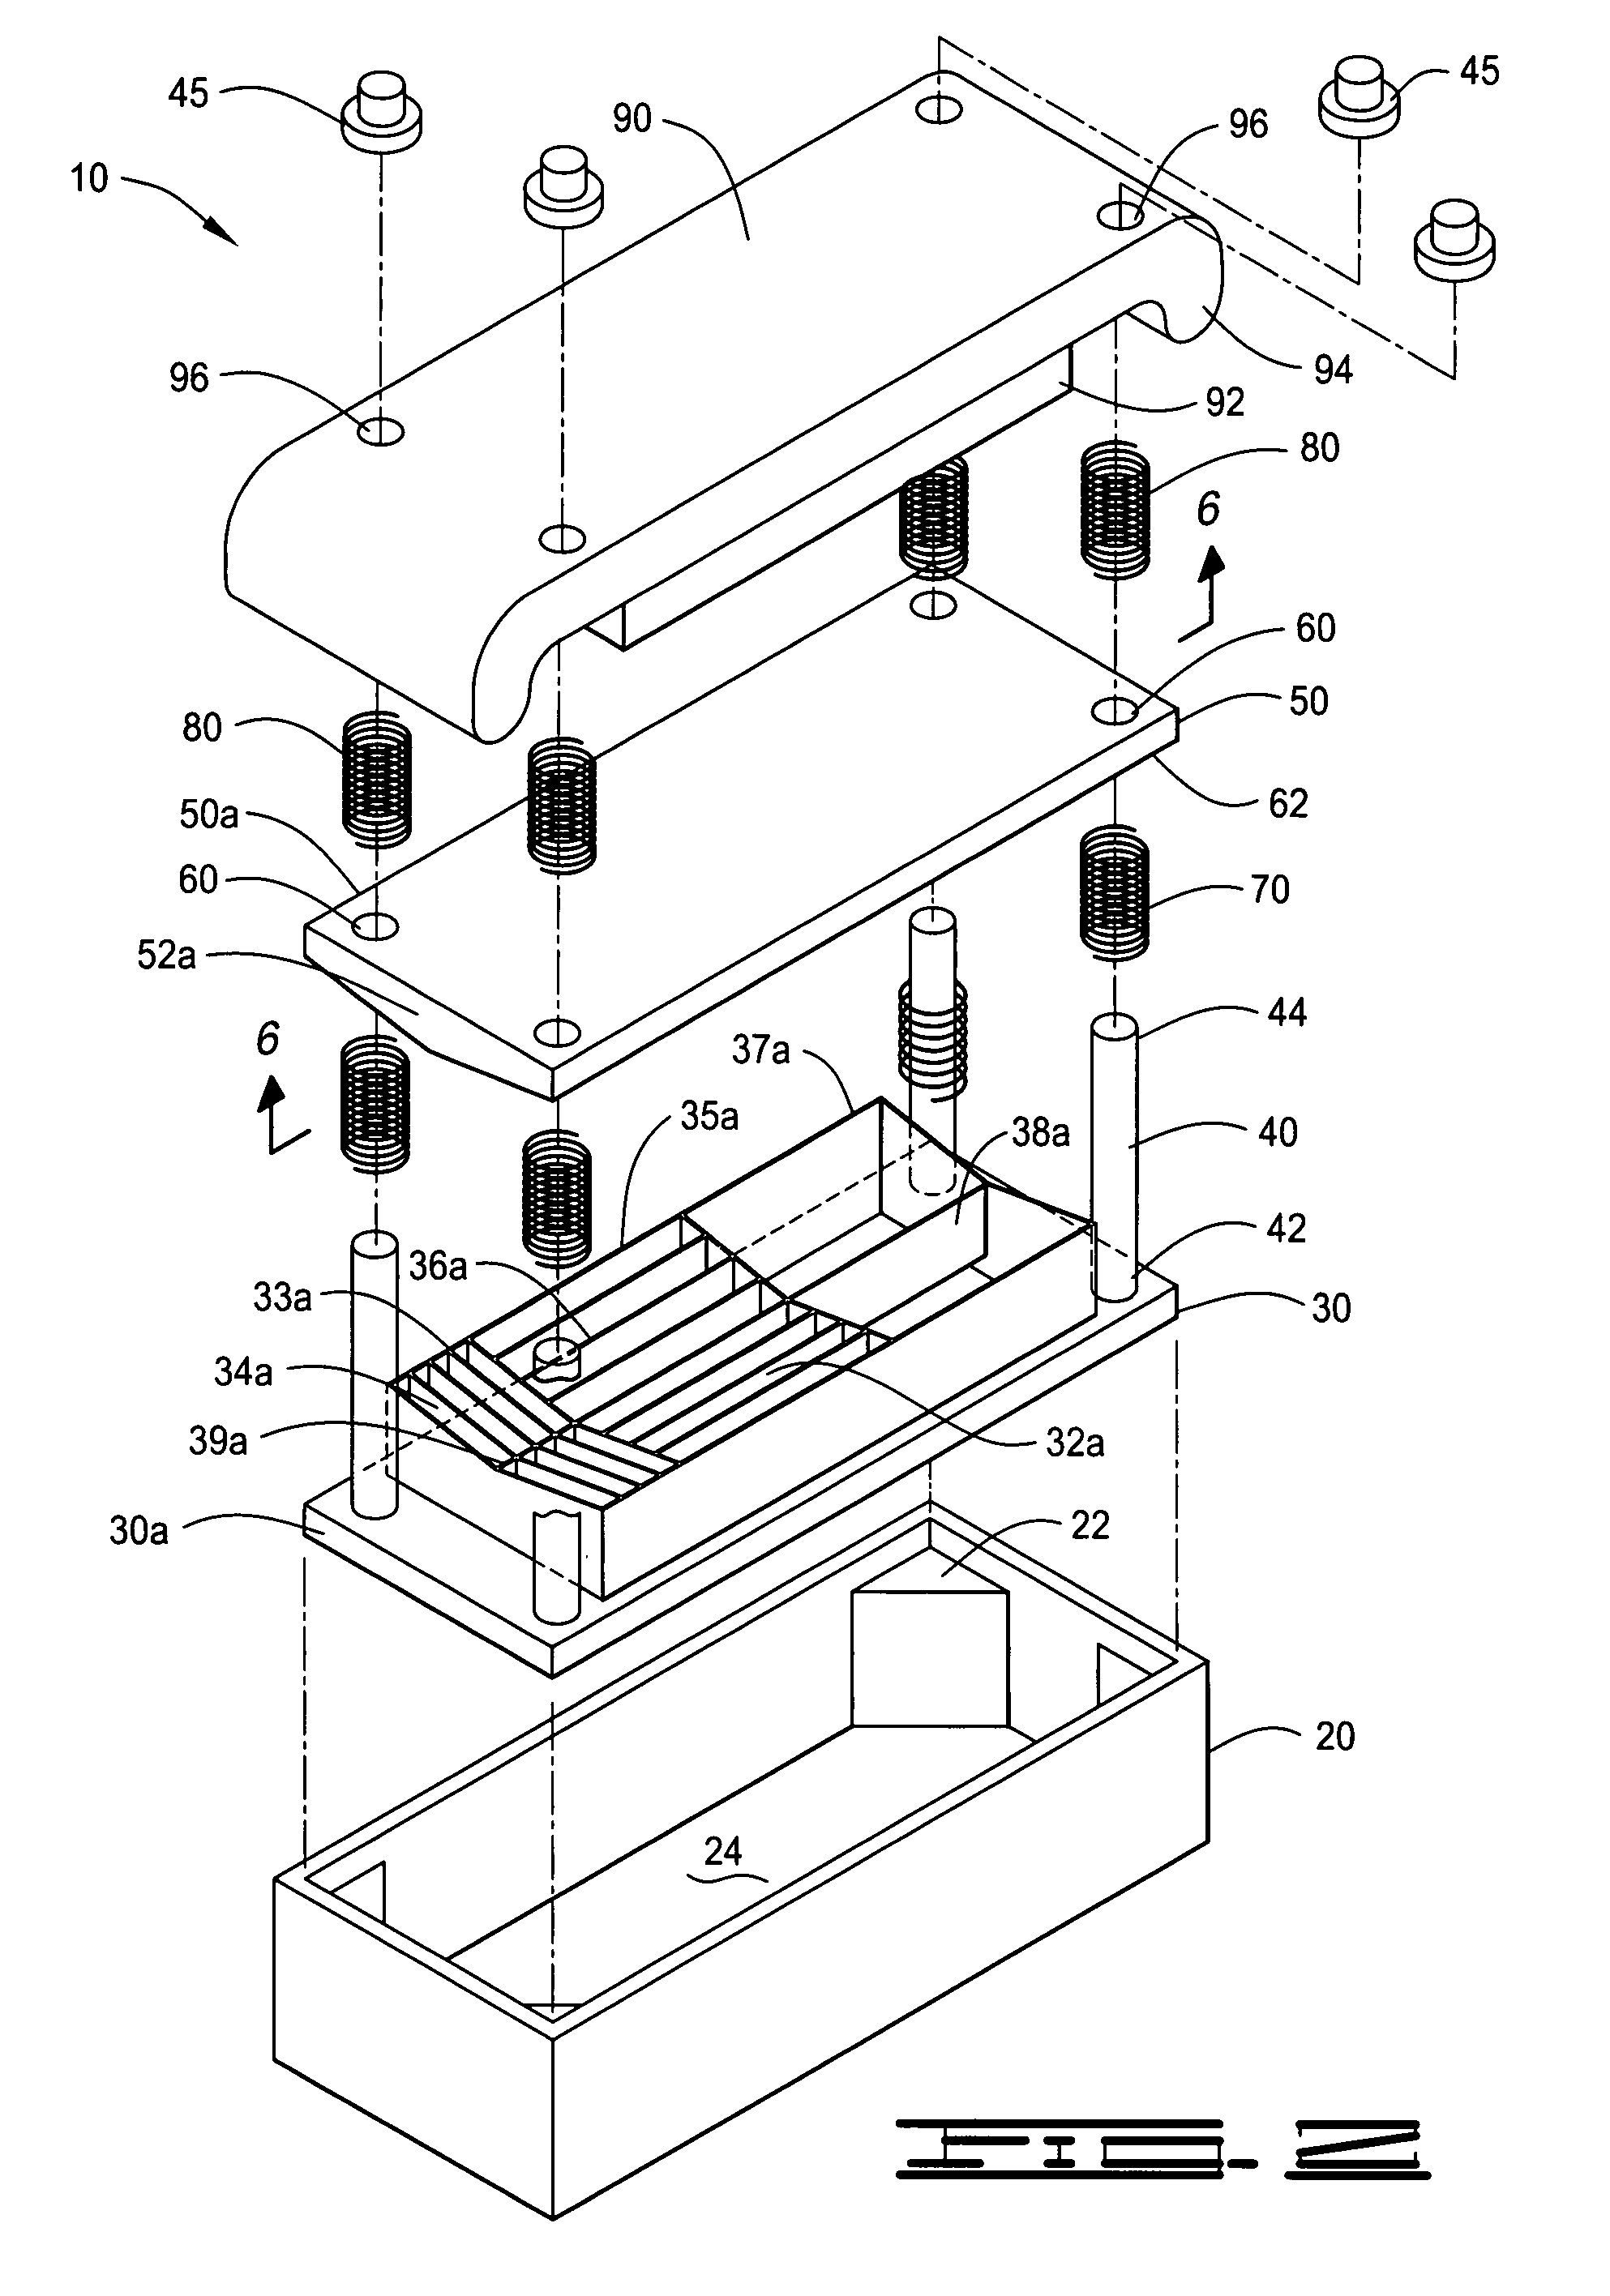 Vegetable cutting device for producing interlocking shaped consumable vegetable objects